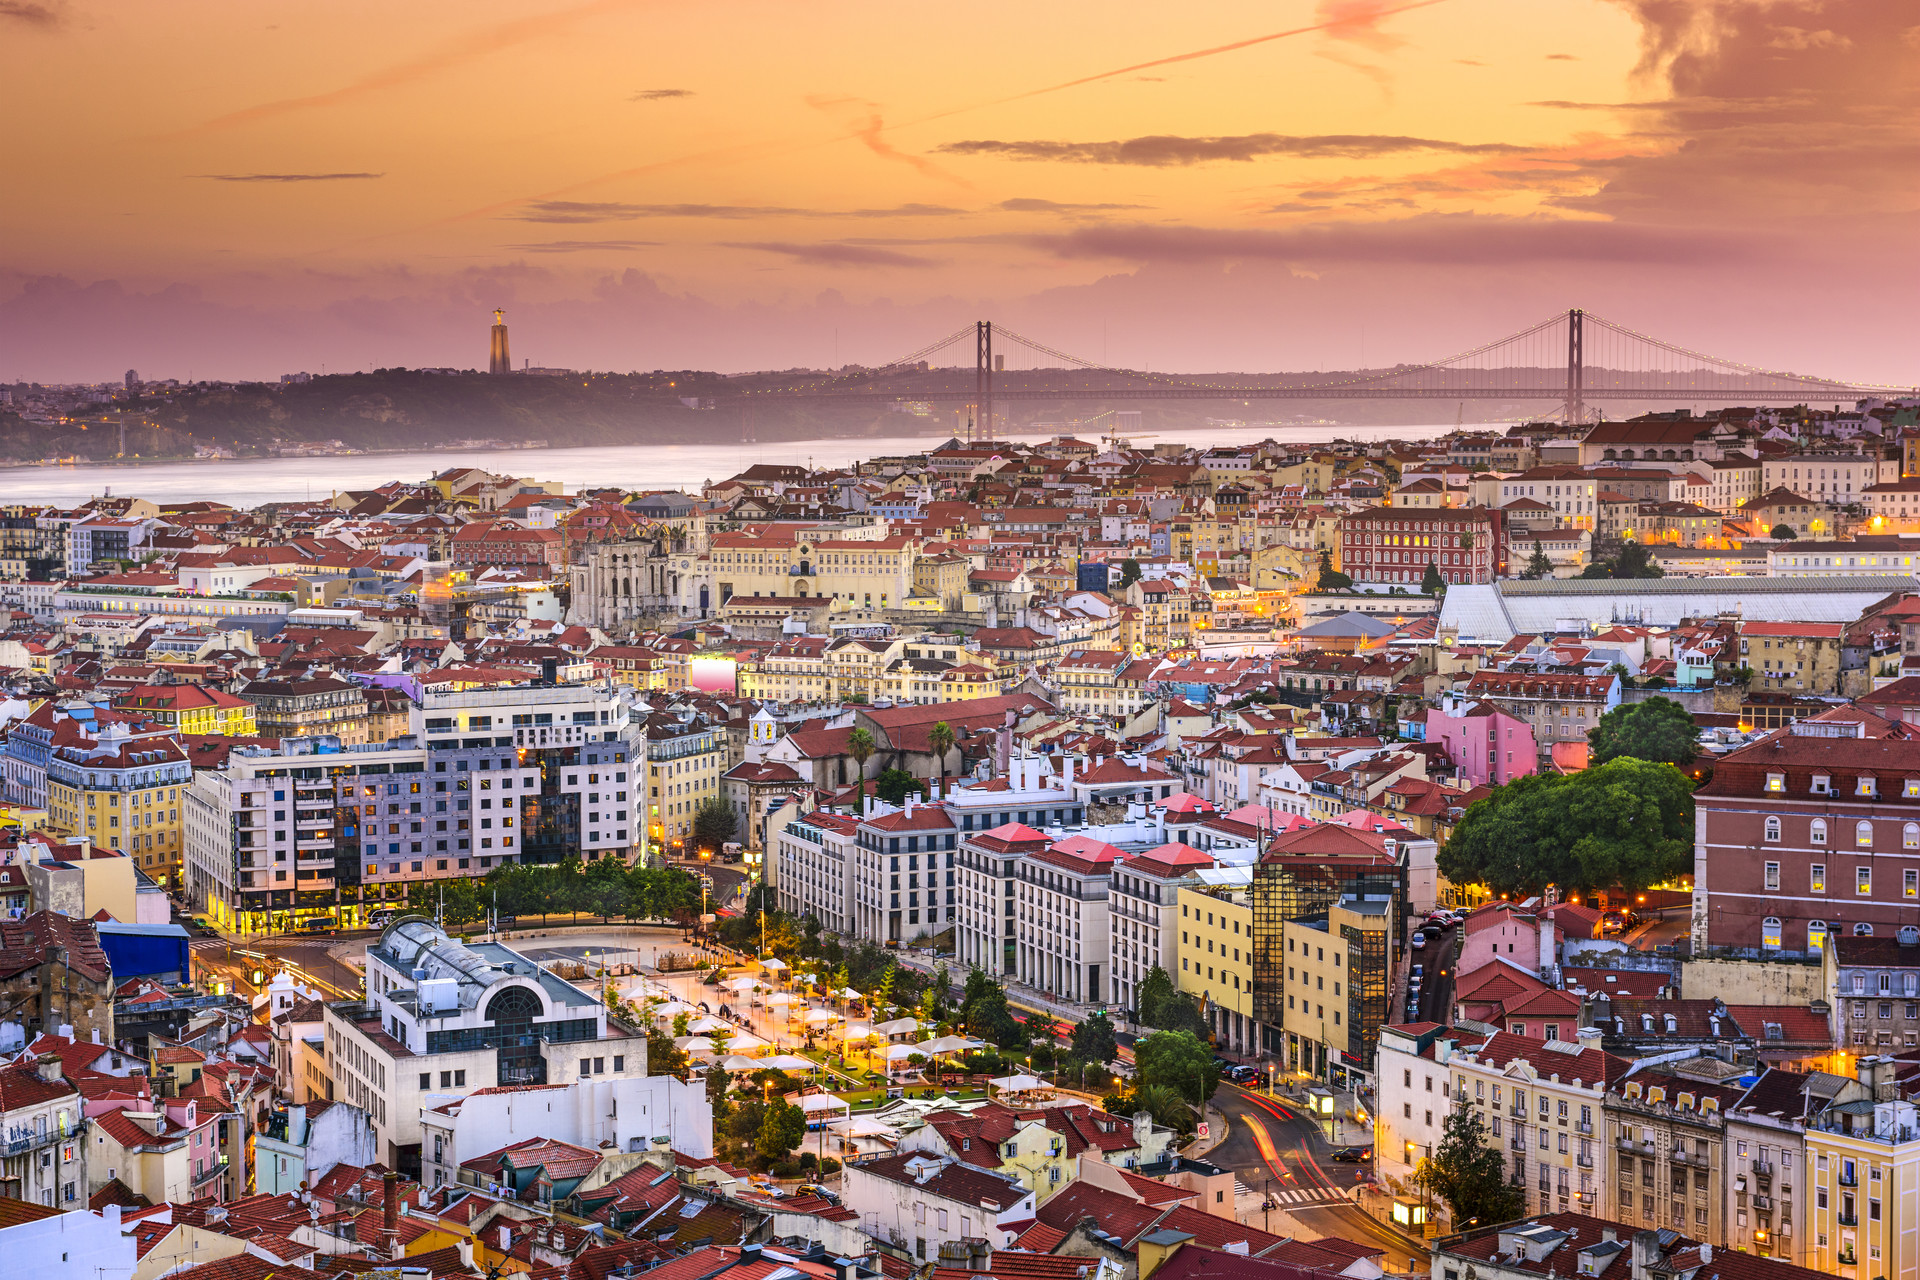 Fall in love with Lisbon, Portugal - Travel Center Blog